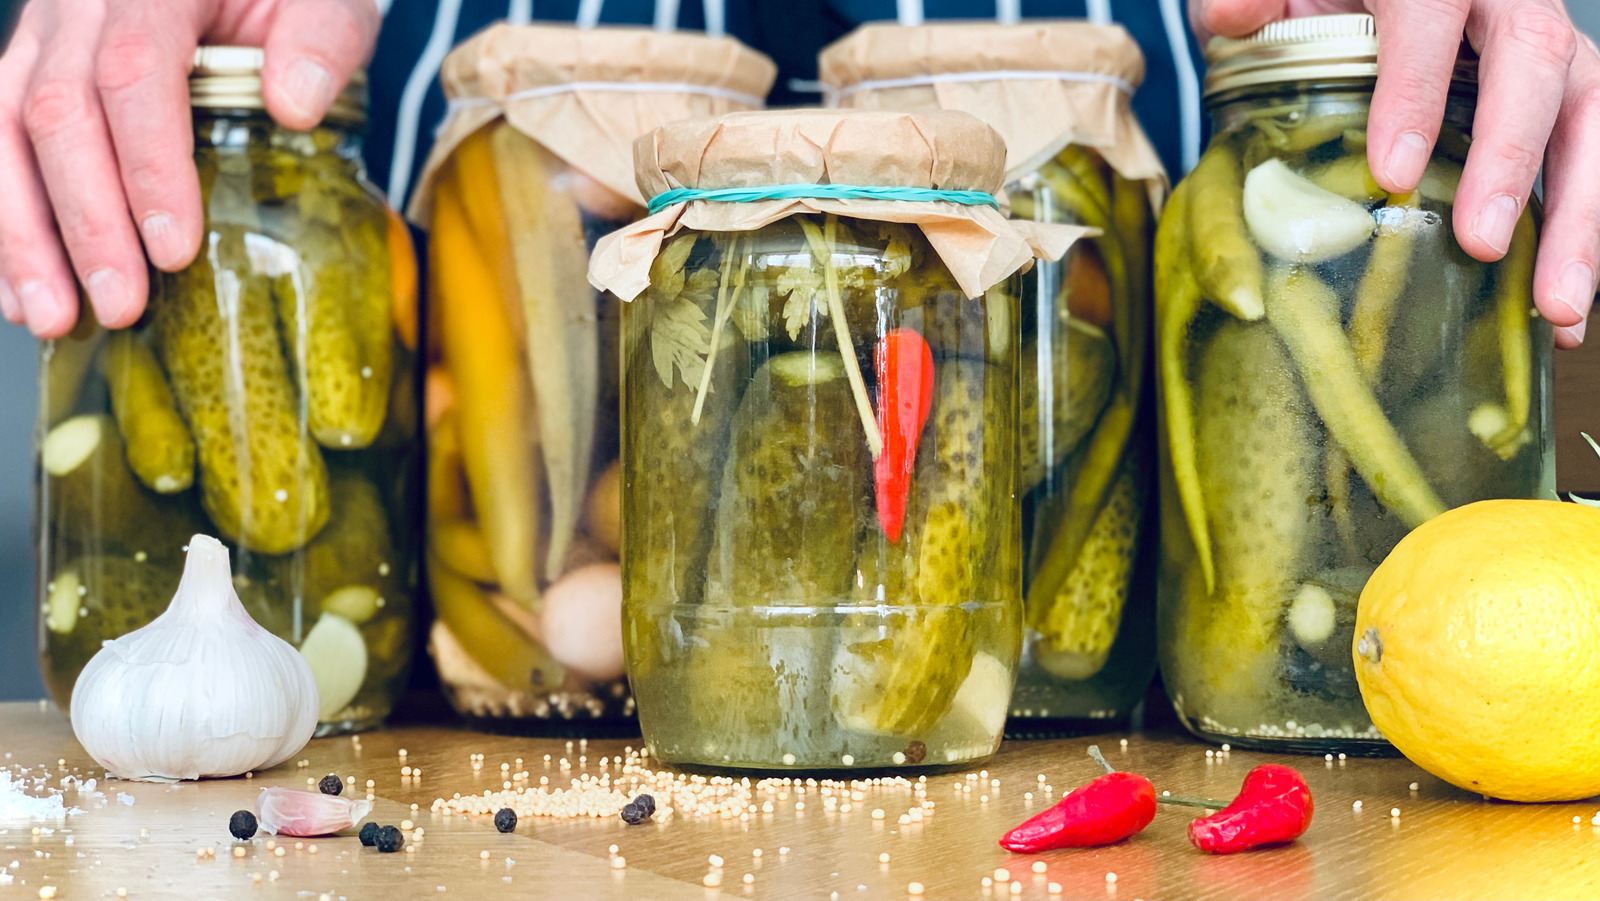 15 Different Types Of Pickles And What Makes Them Unique